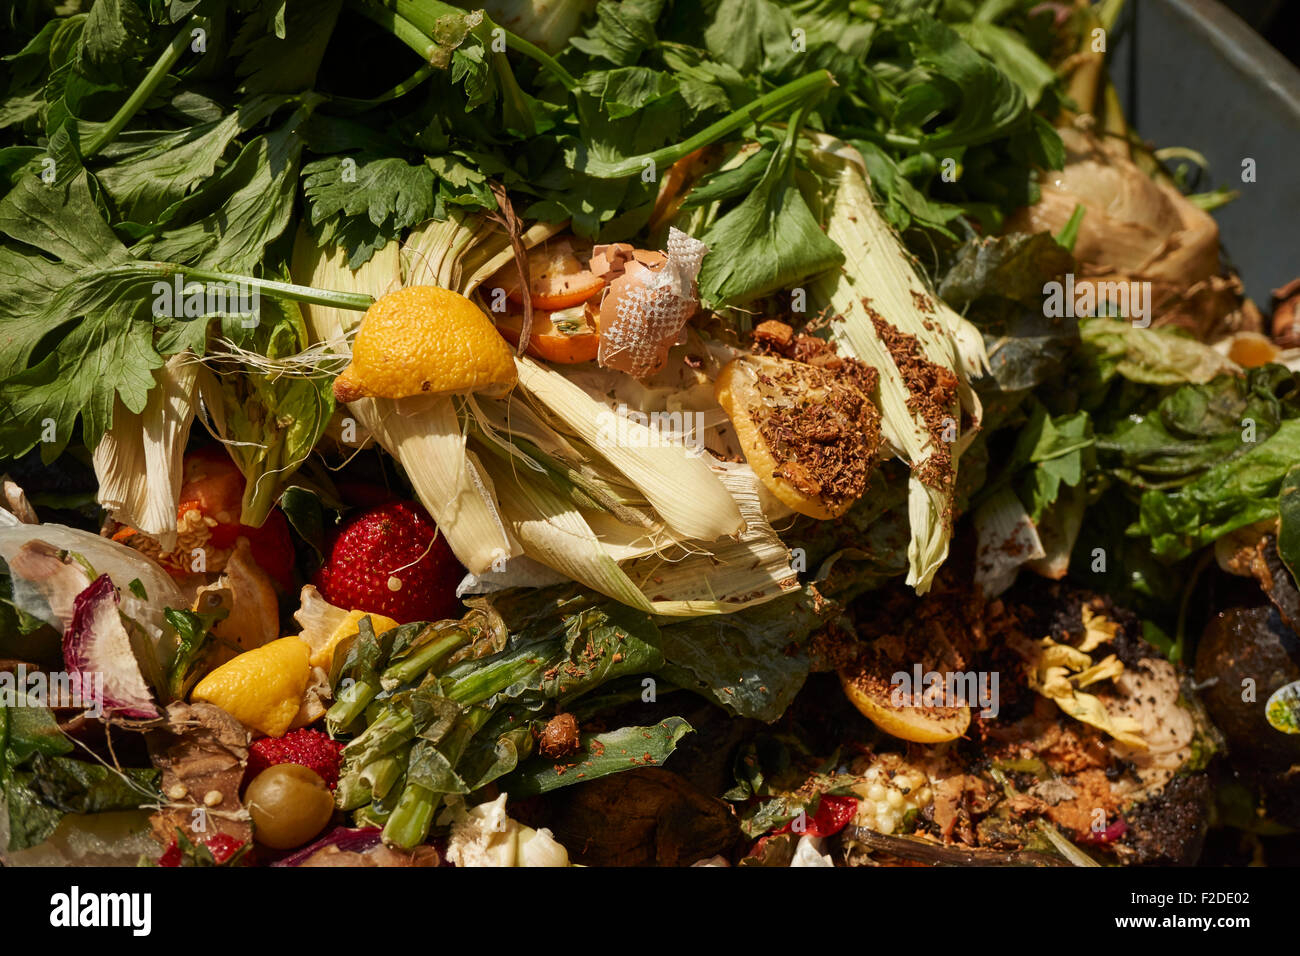 A food waste collection bin at the Union Square Greenmarket, Manhattan, New York City, USA Stock Photo